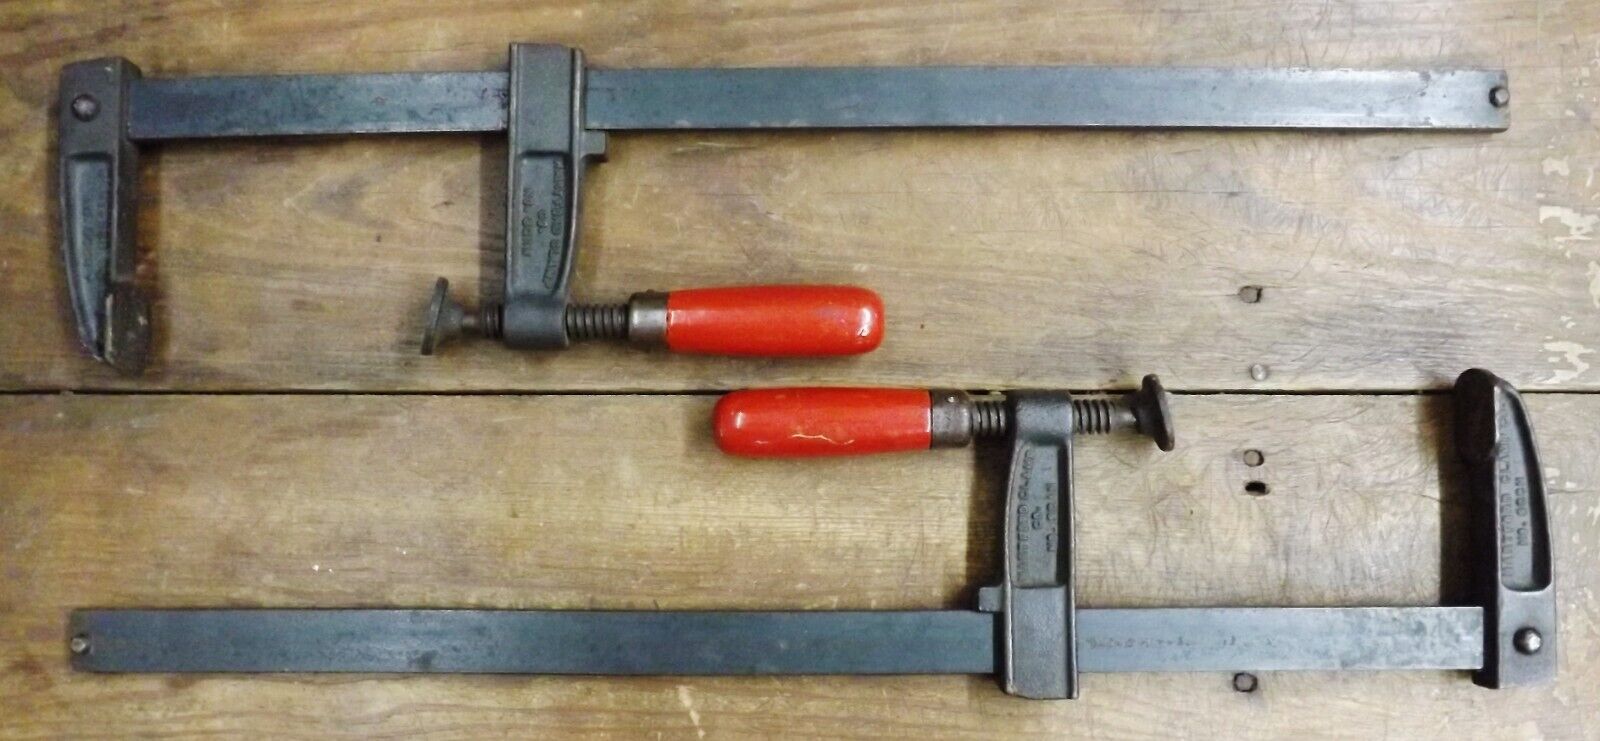 Hartford Clamp Co USA Matched Pair Sliding Bar Clamps 20